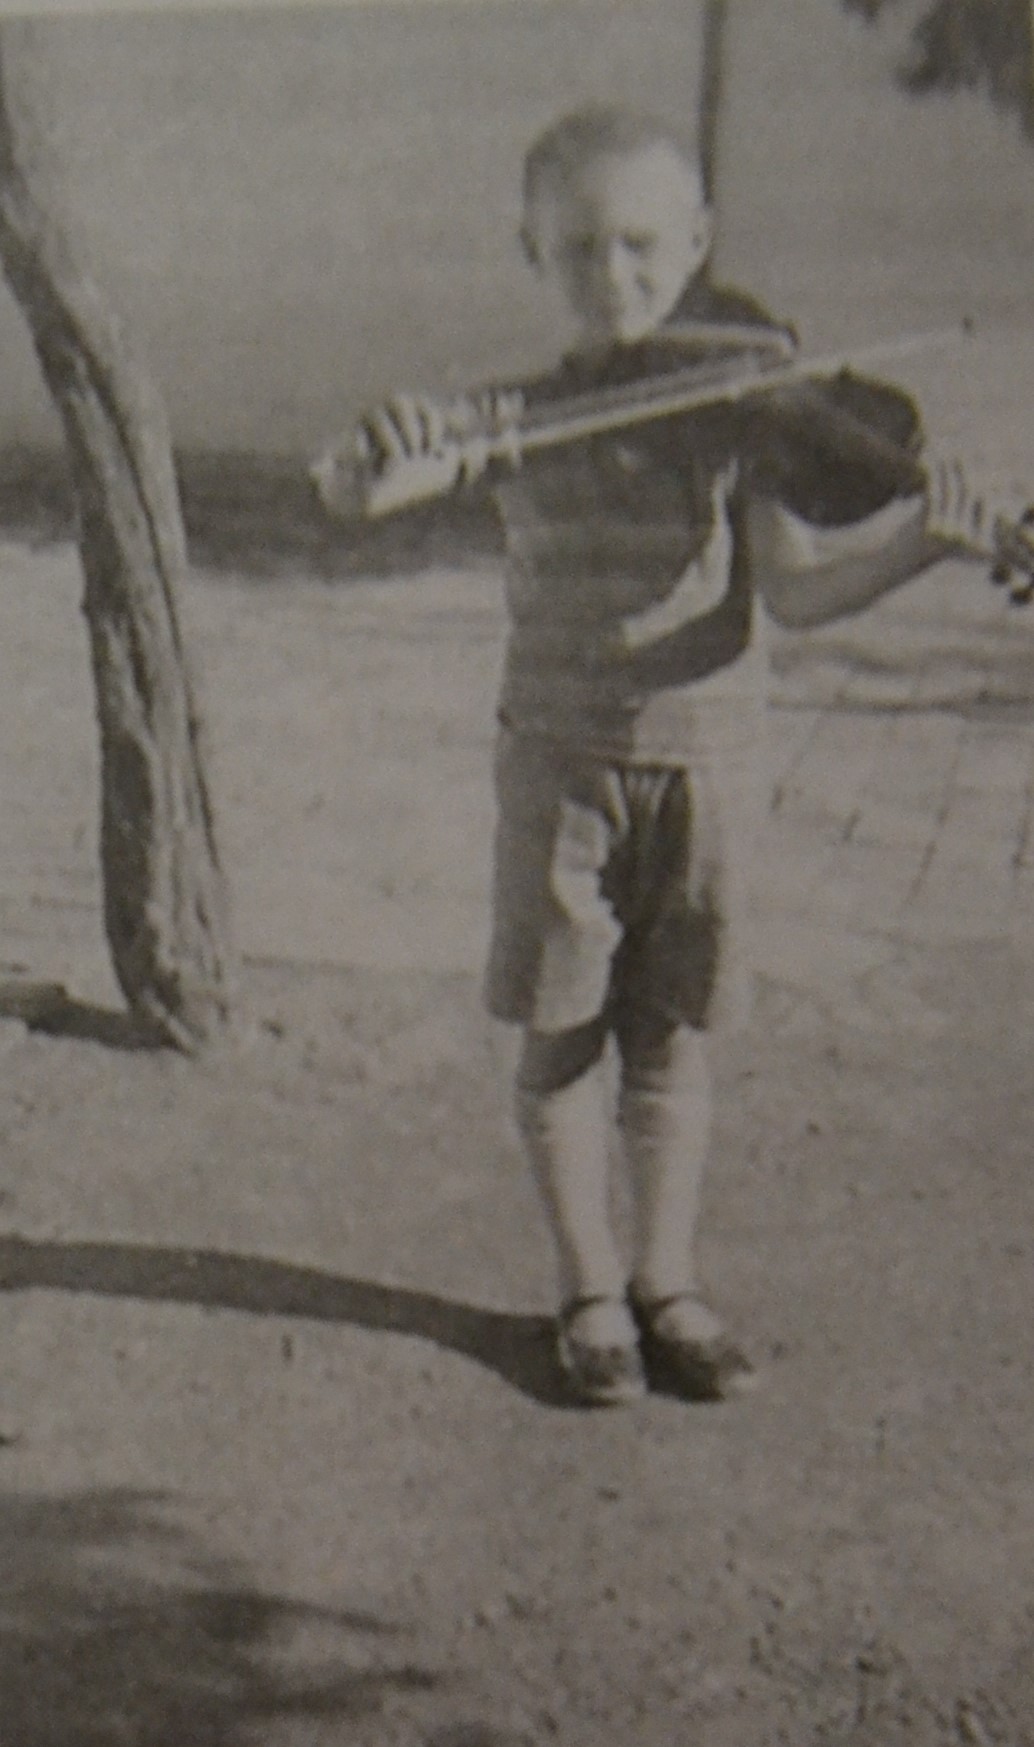 Playing violin in 1930s